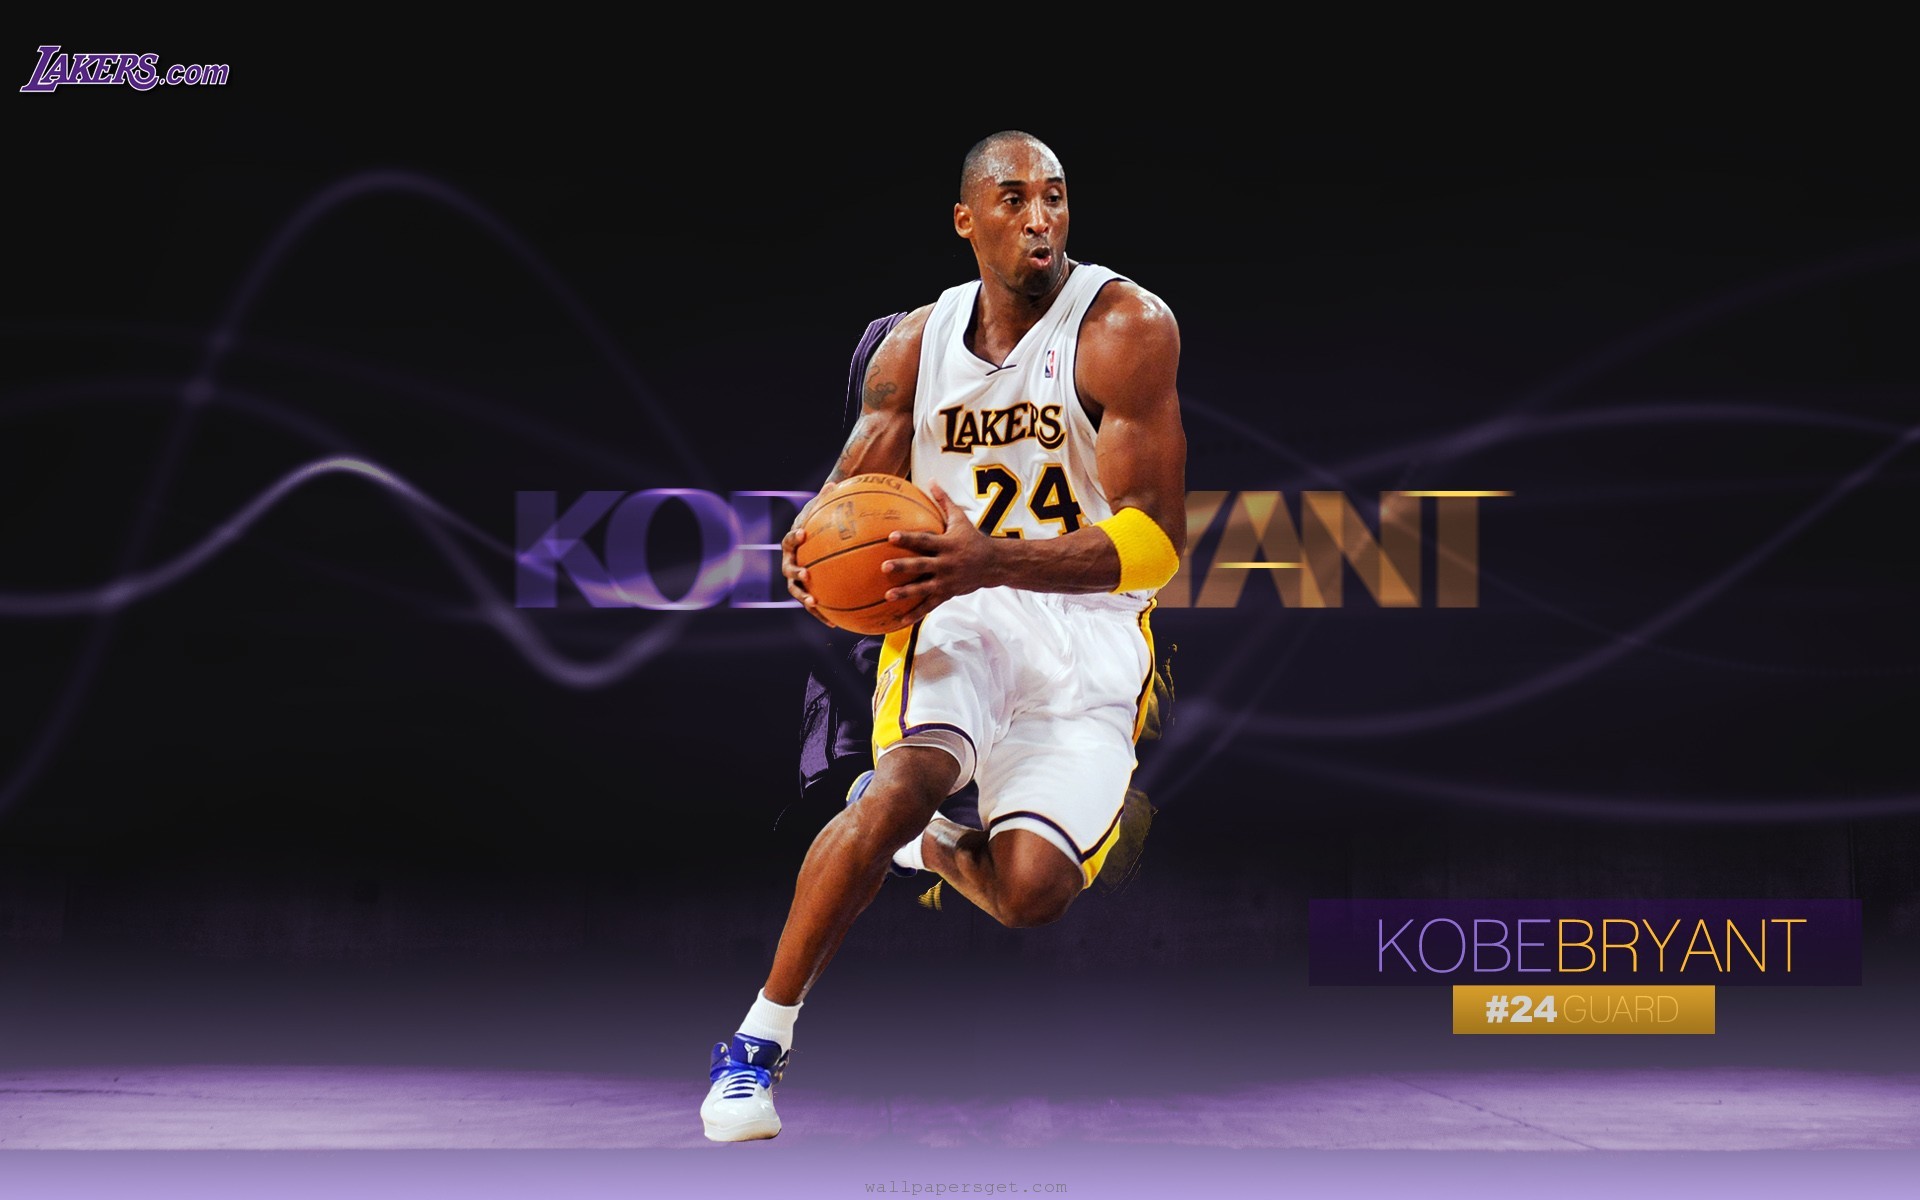 Kobe Bryant Cool Wallpapers for Phone